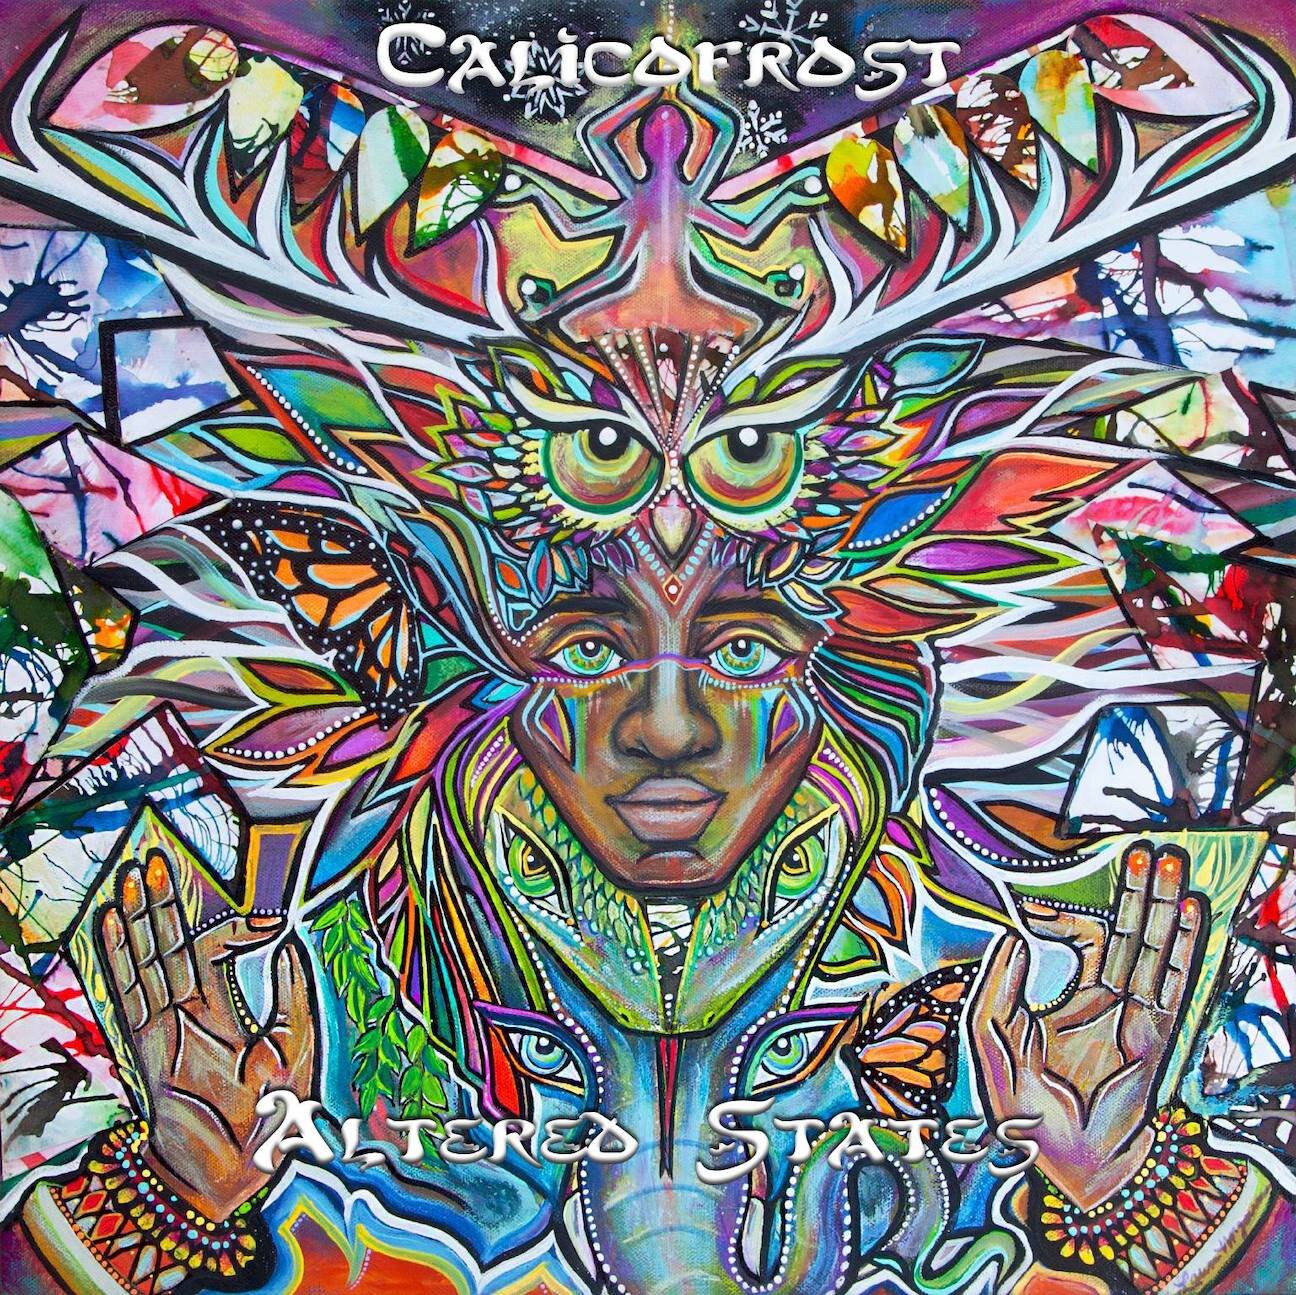 Calicofrost album with writing copy.jpg